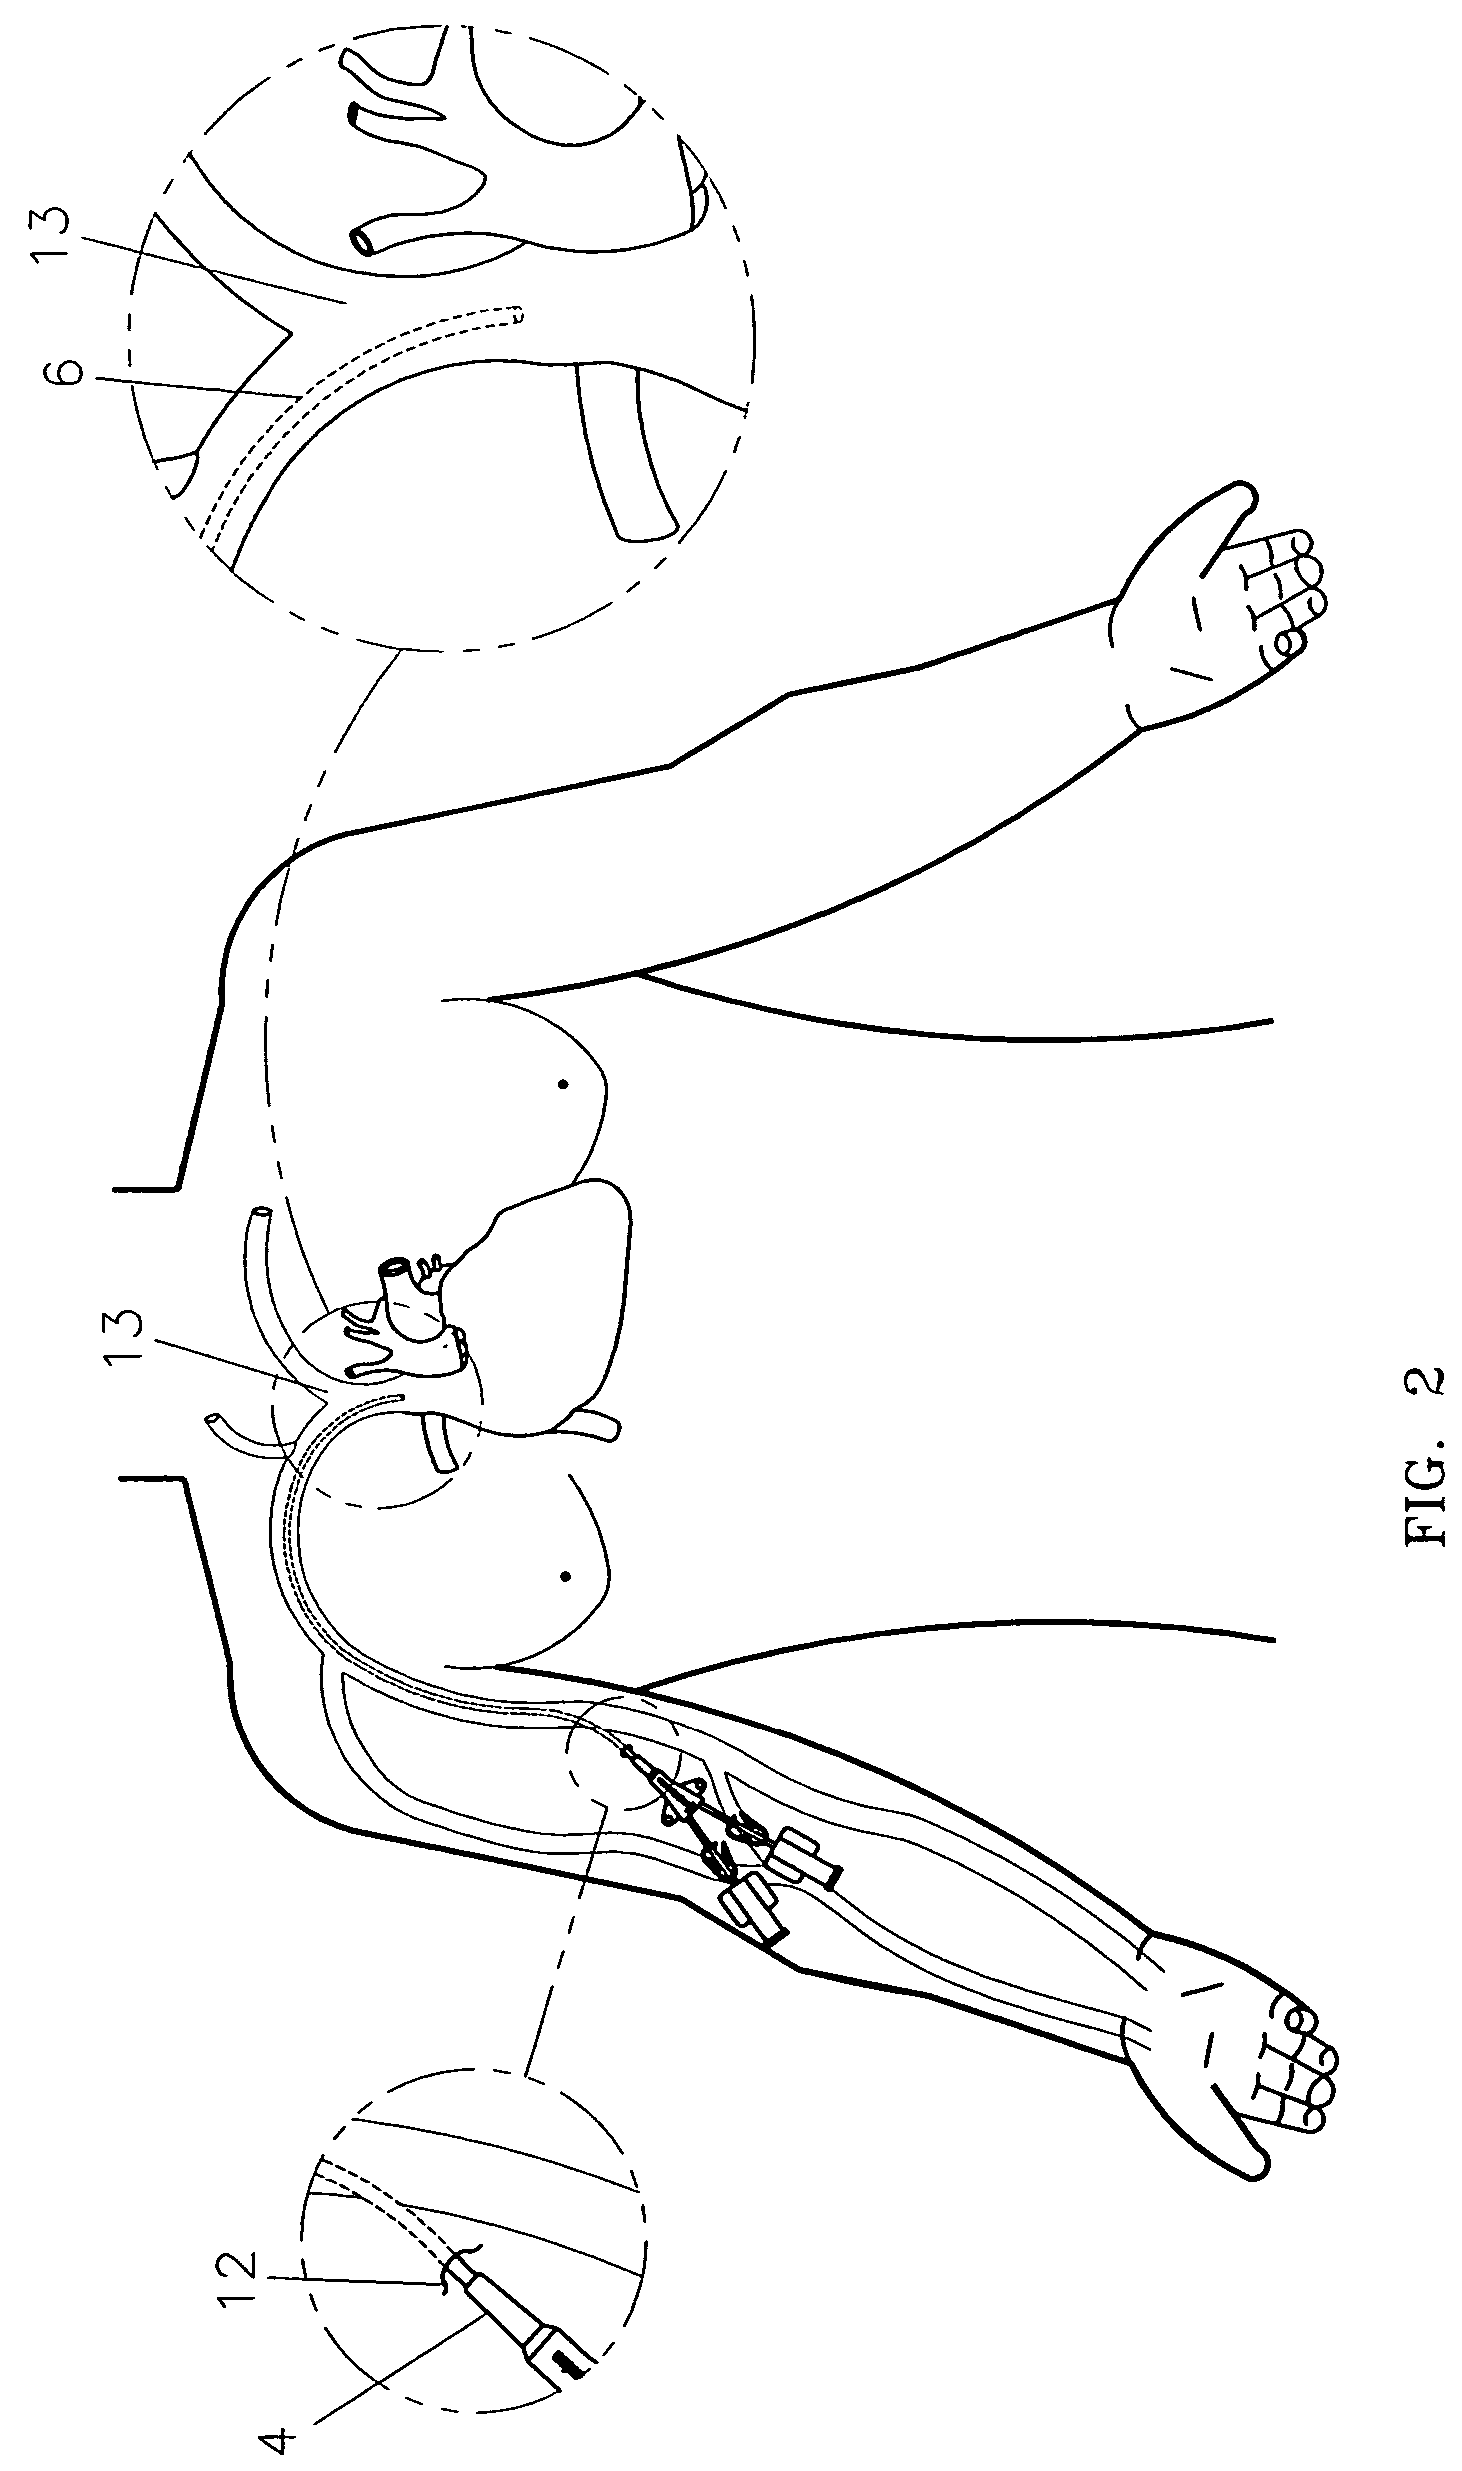 Variable characteristic venous access catheter shaft